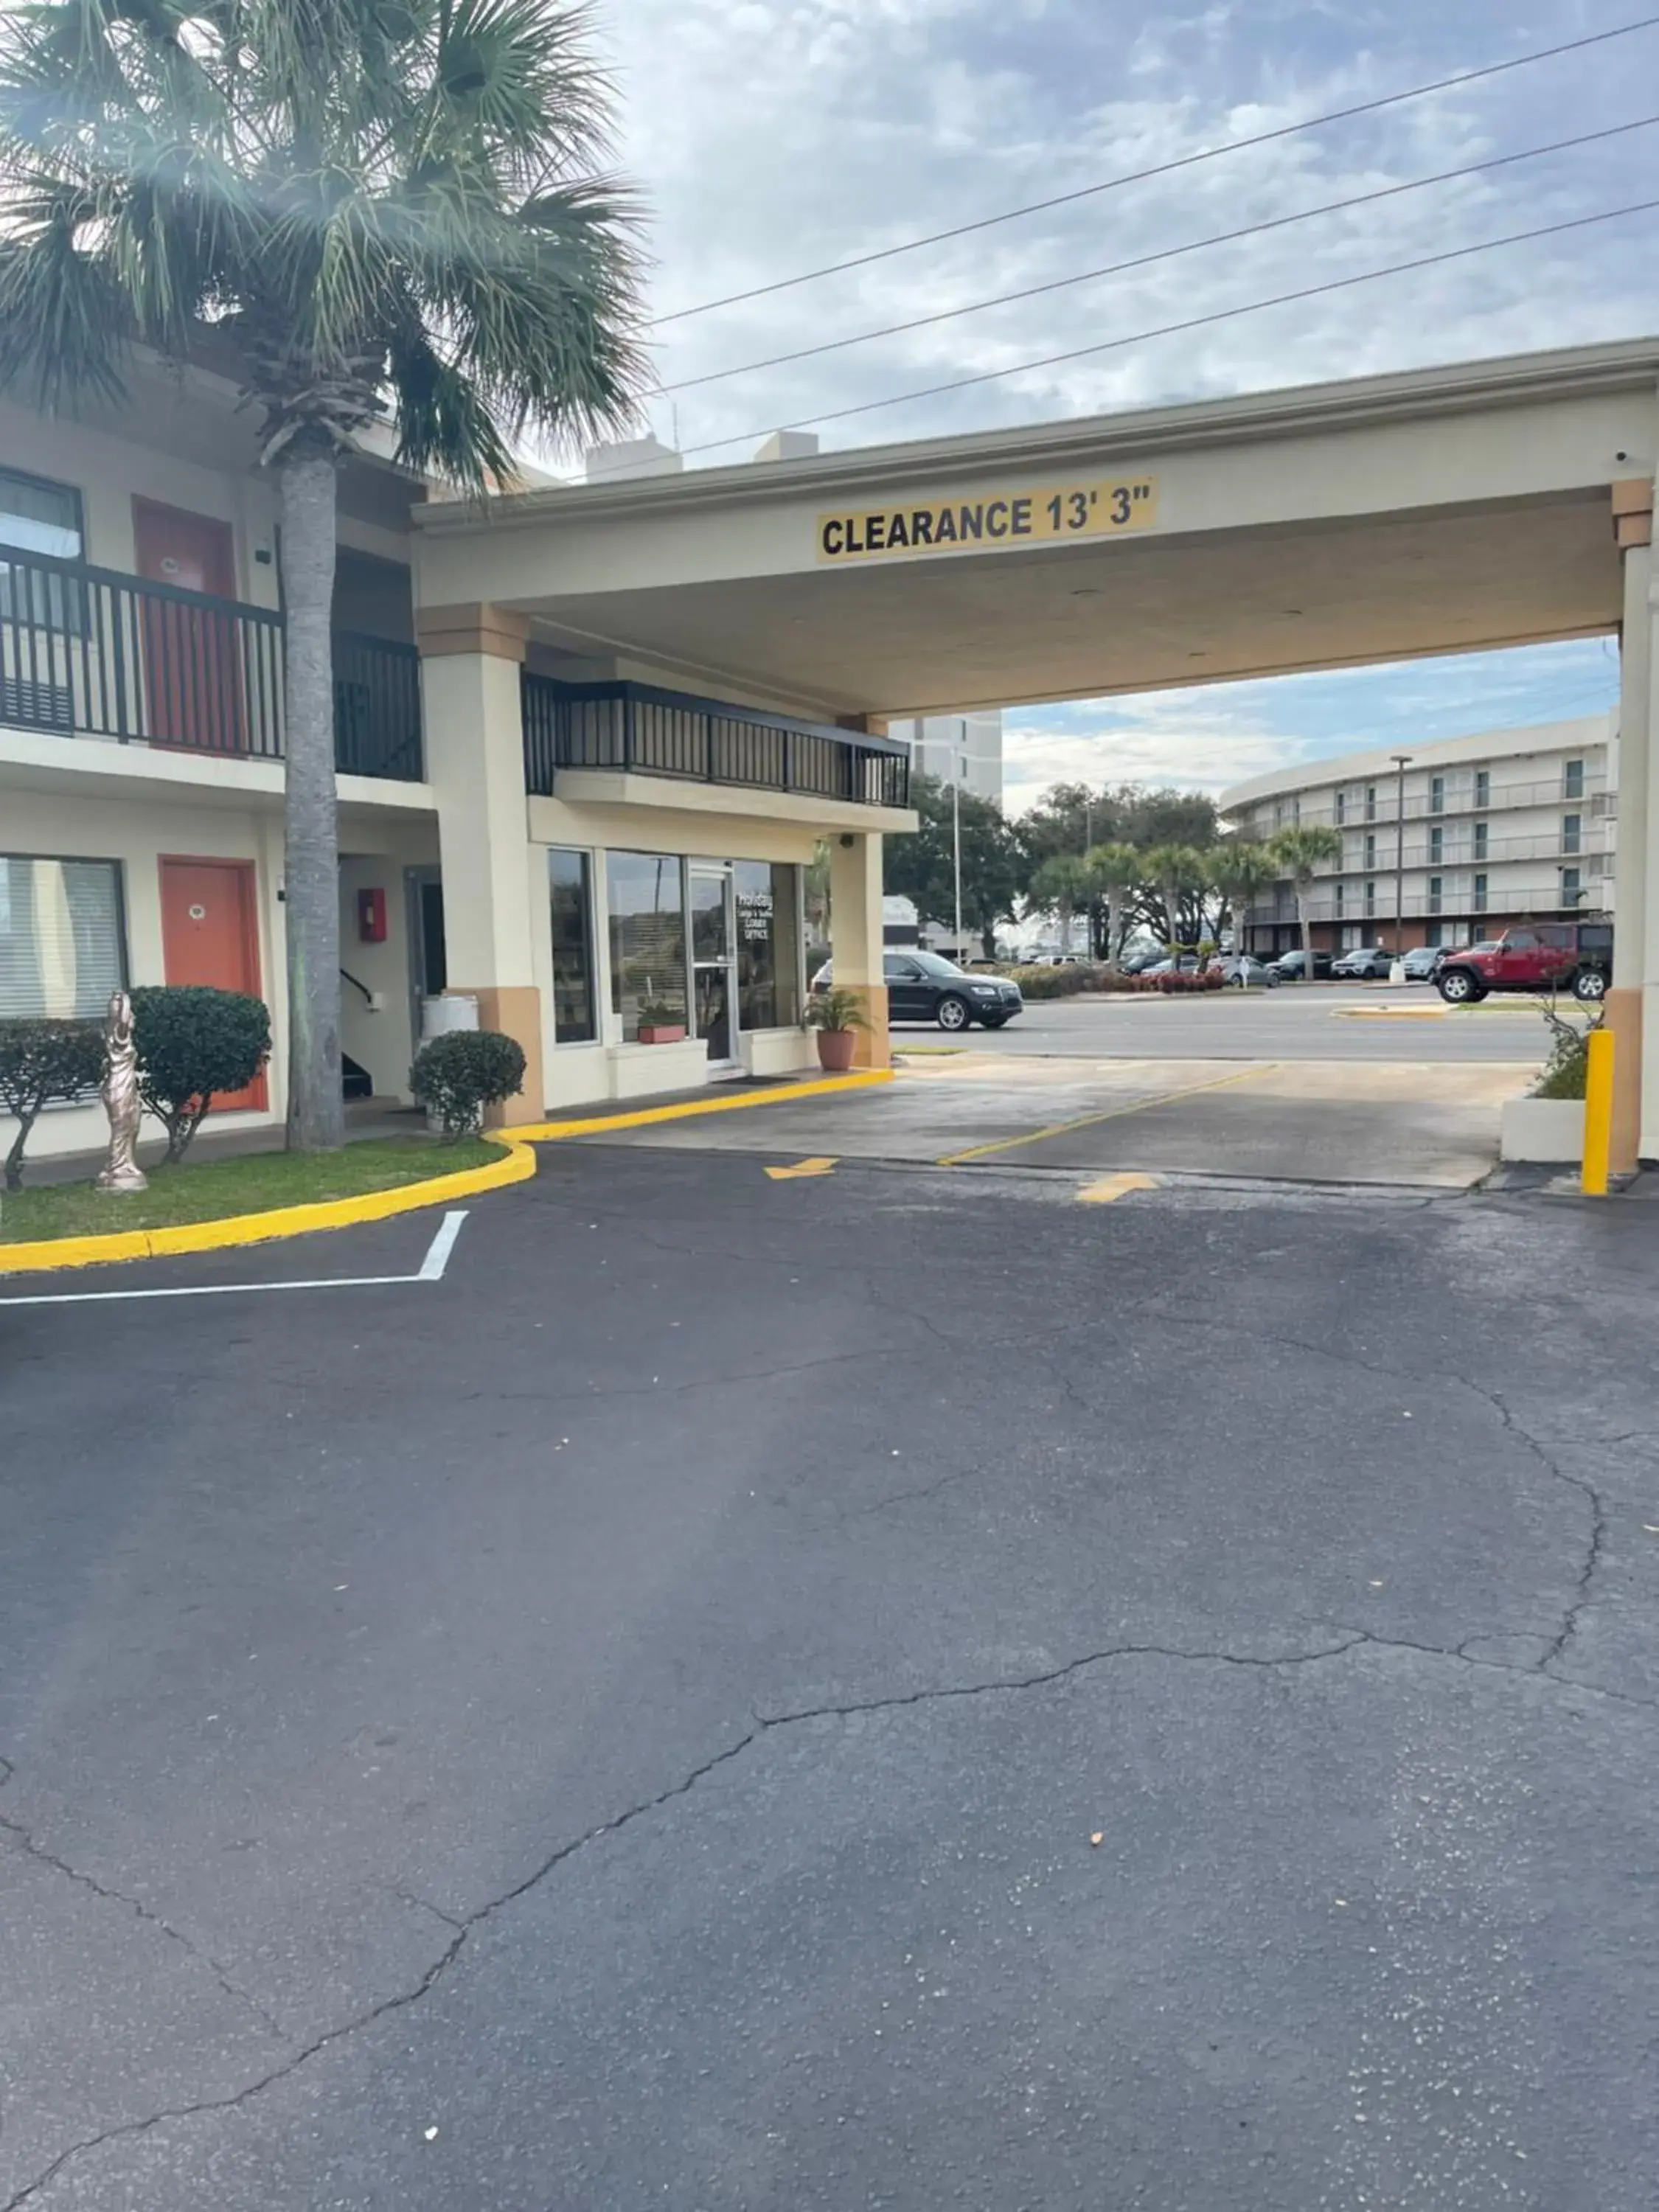 Property Building in Hole Inn the Wall Hotel - Sunset Plaza - Fort Walton Beach